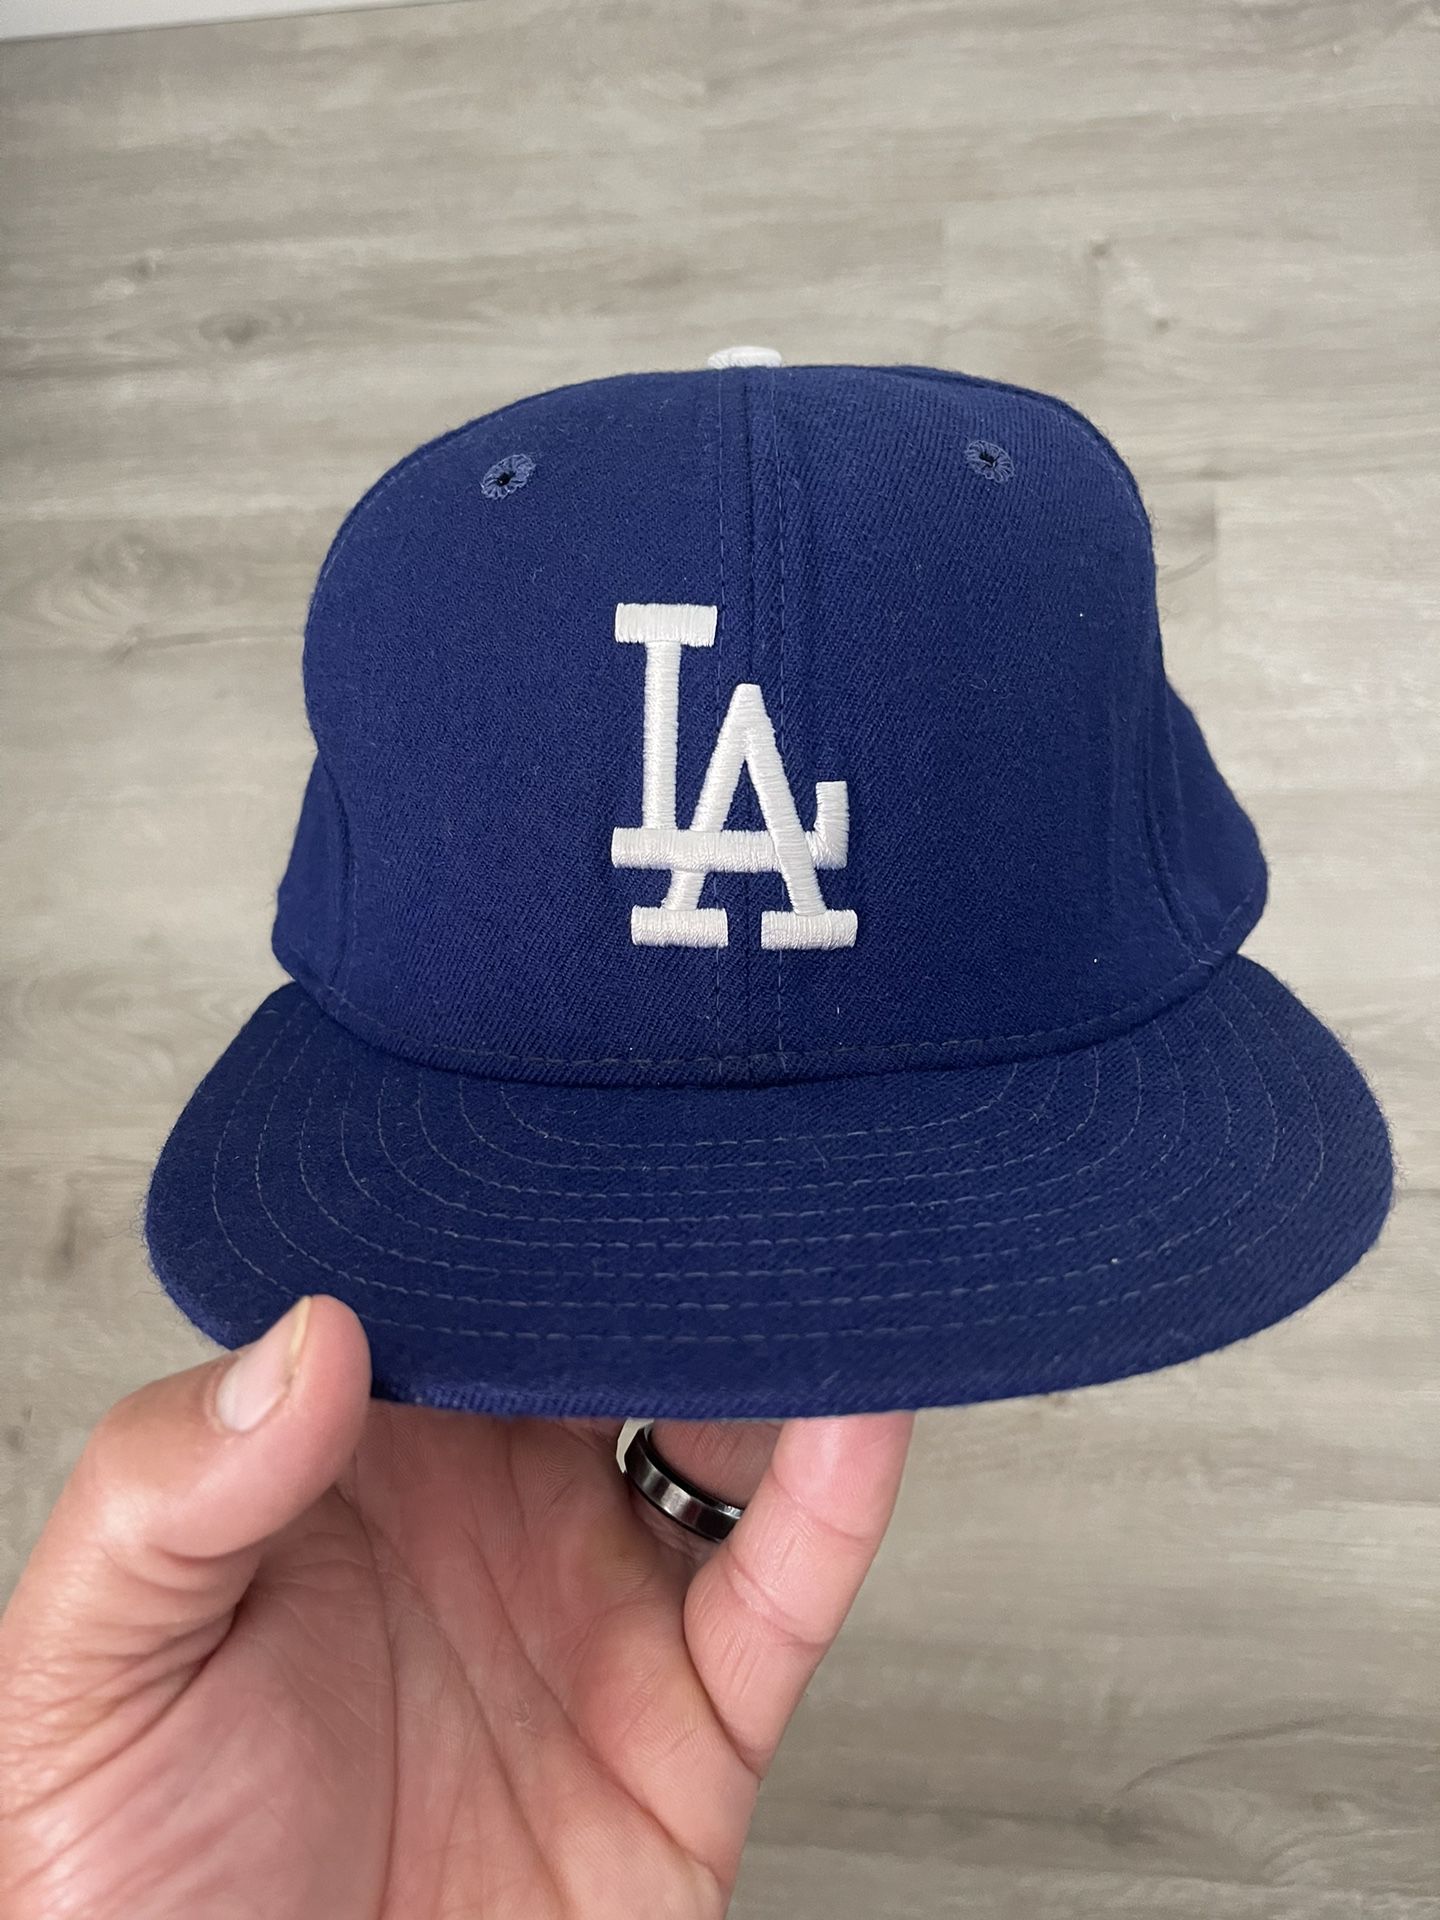 Vintage 90s Los Angeles Dodgers New Era Pro Model Fitted Hat Size 7 1/2 Green Underbrim 